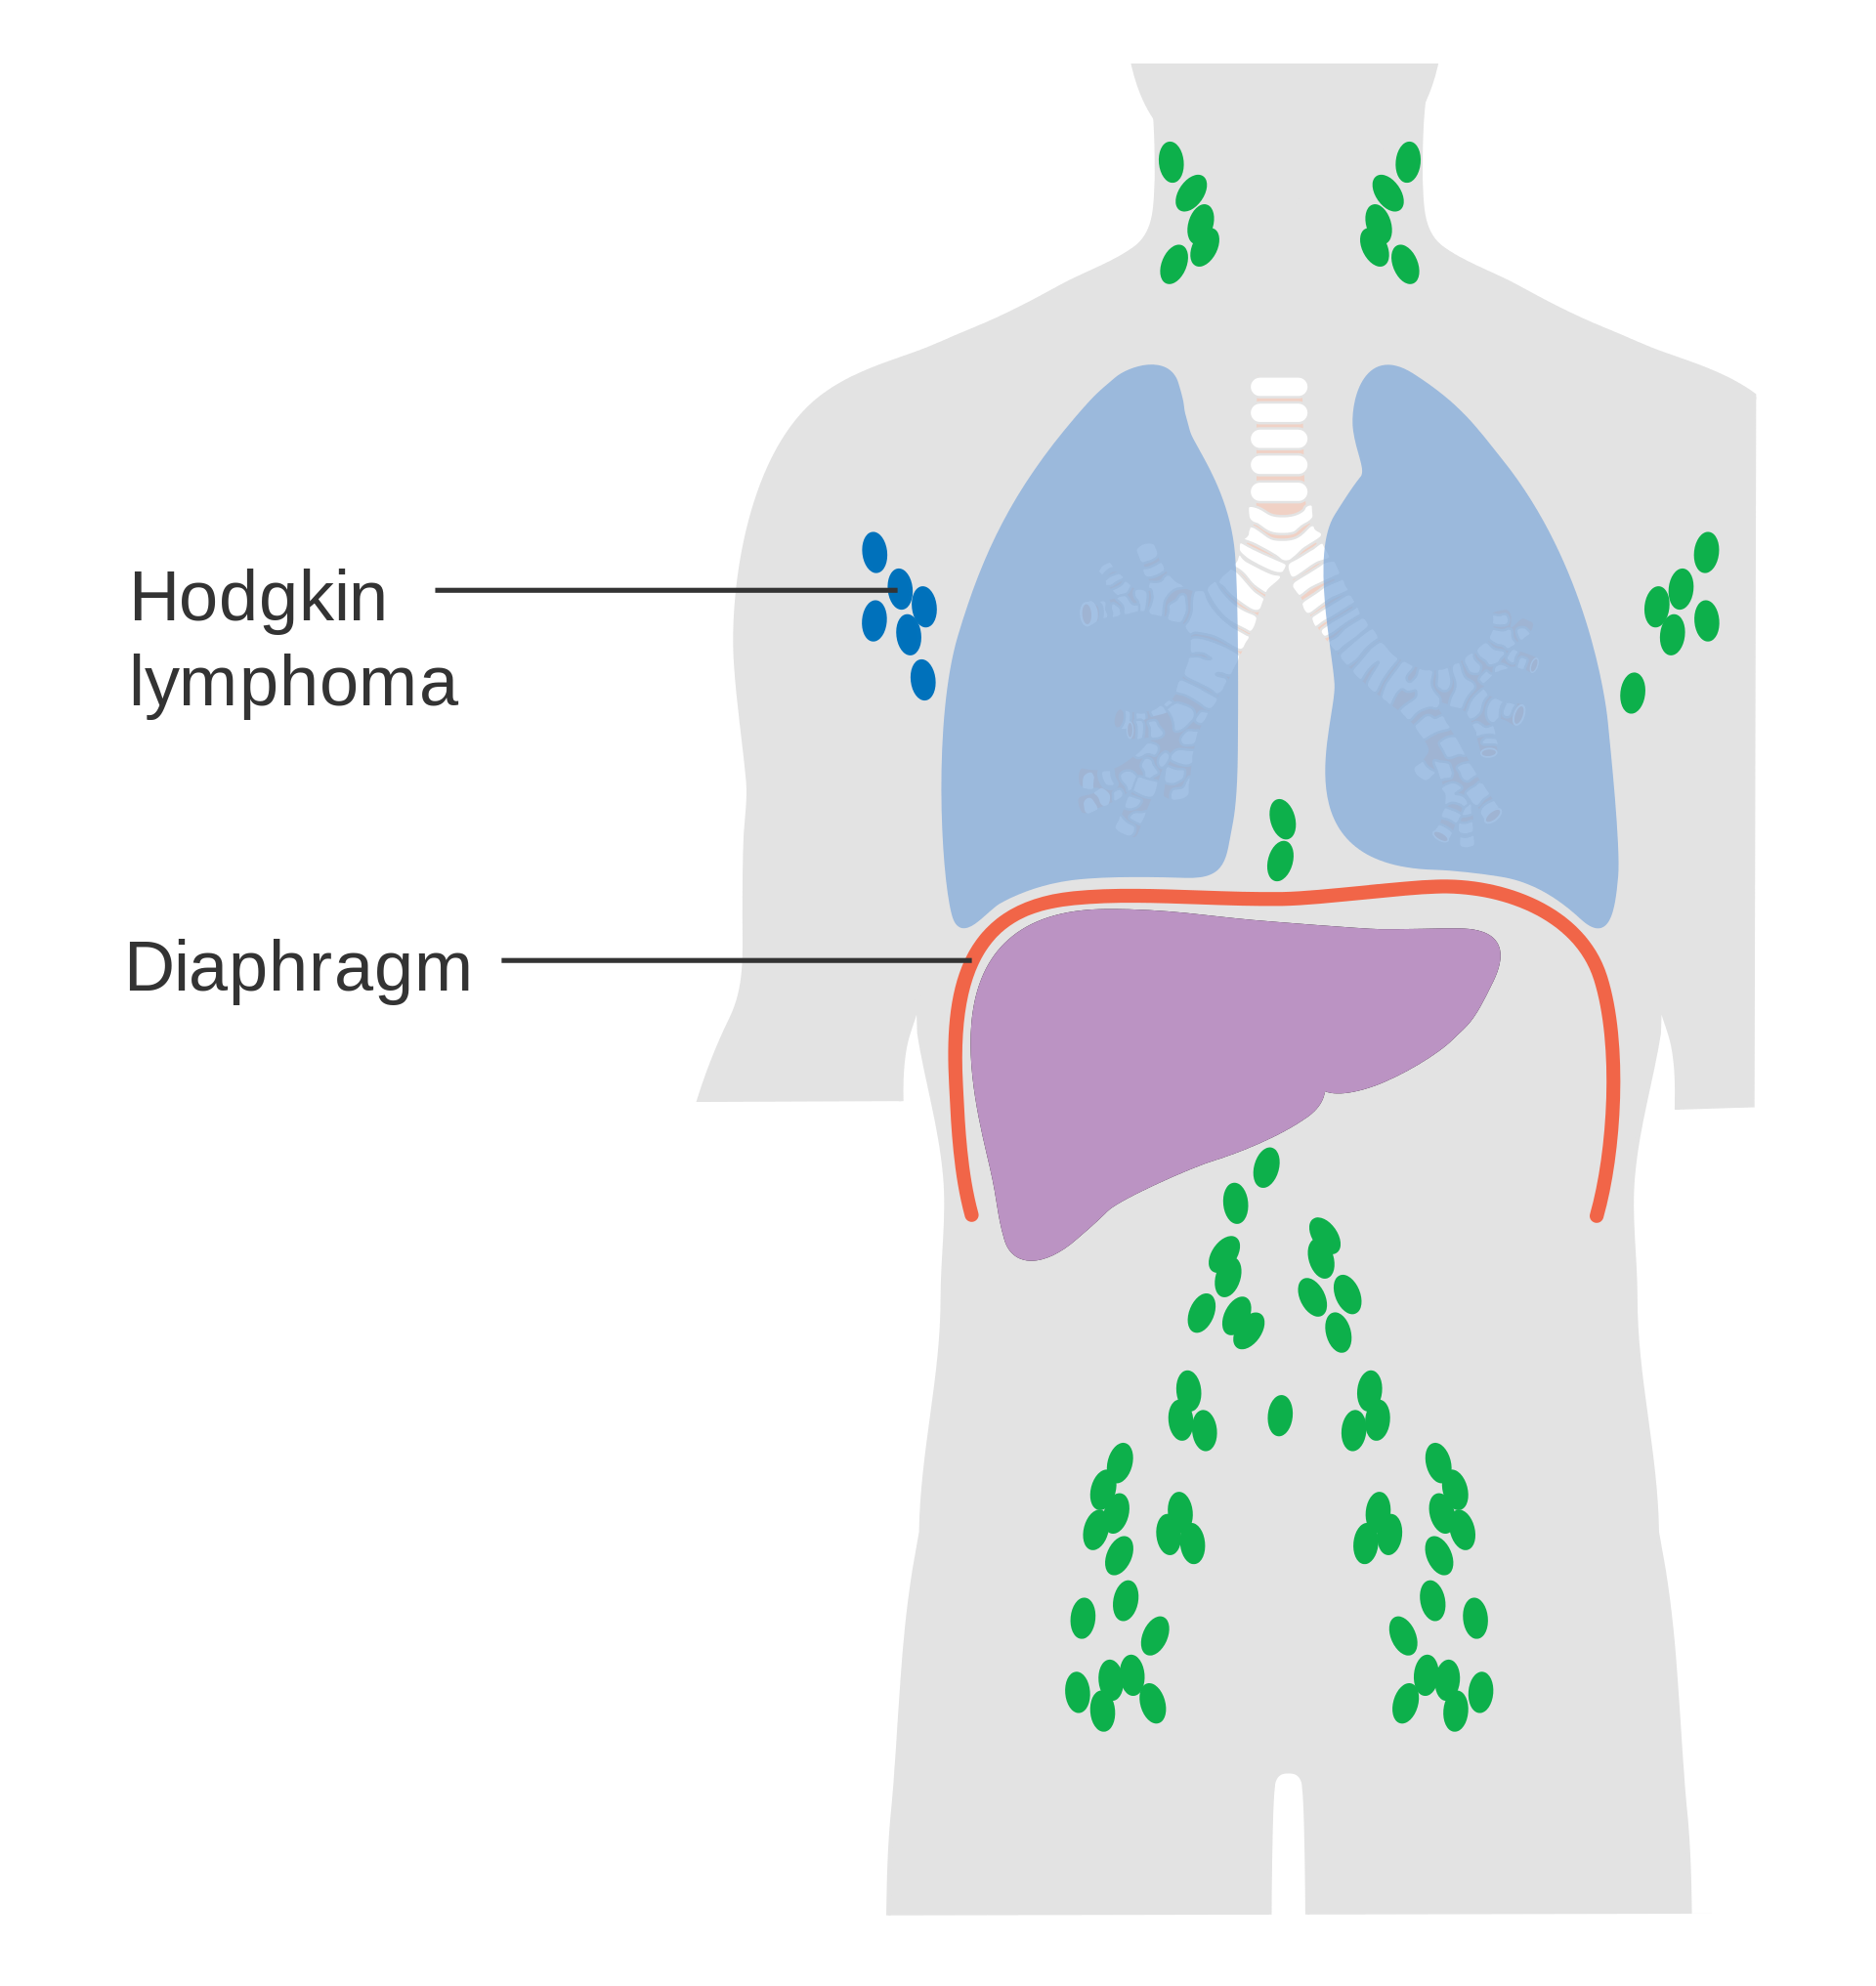 Stage I Hodgkin lymphoma: lymph nodes affected in one area (in this picture the axilla)